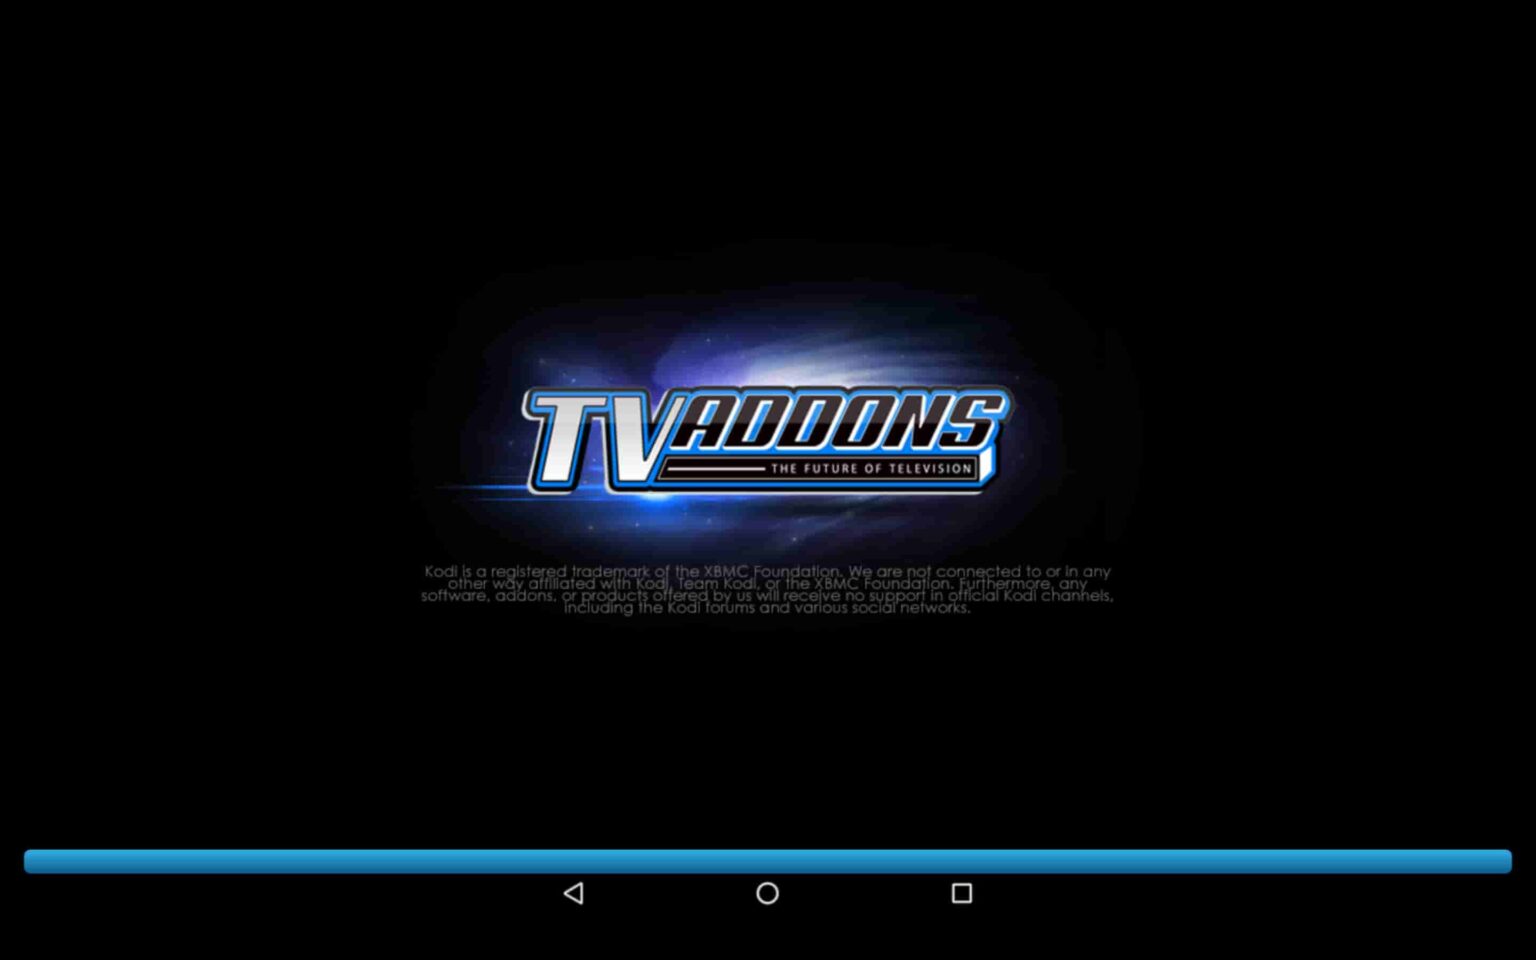 tvmc for windows download